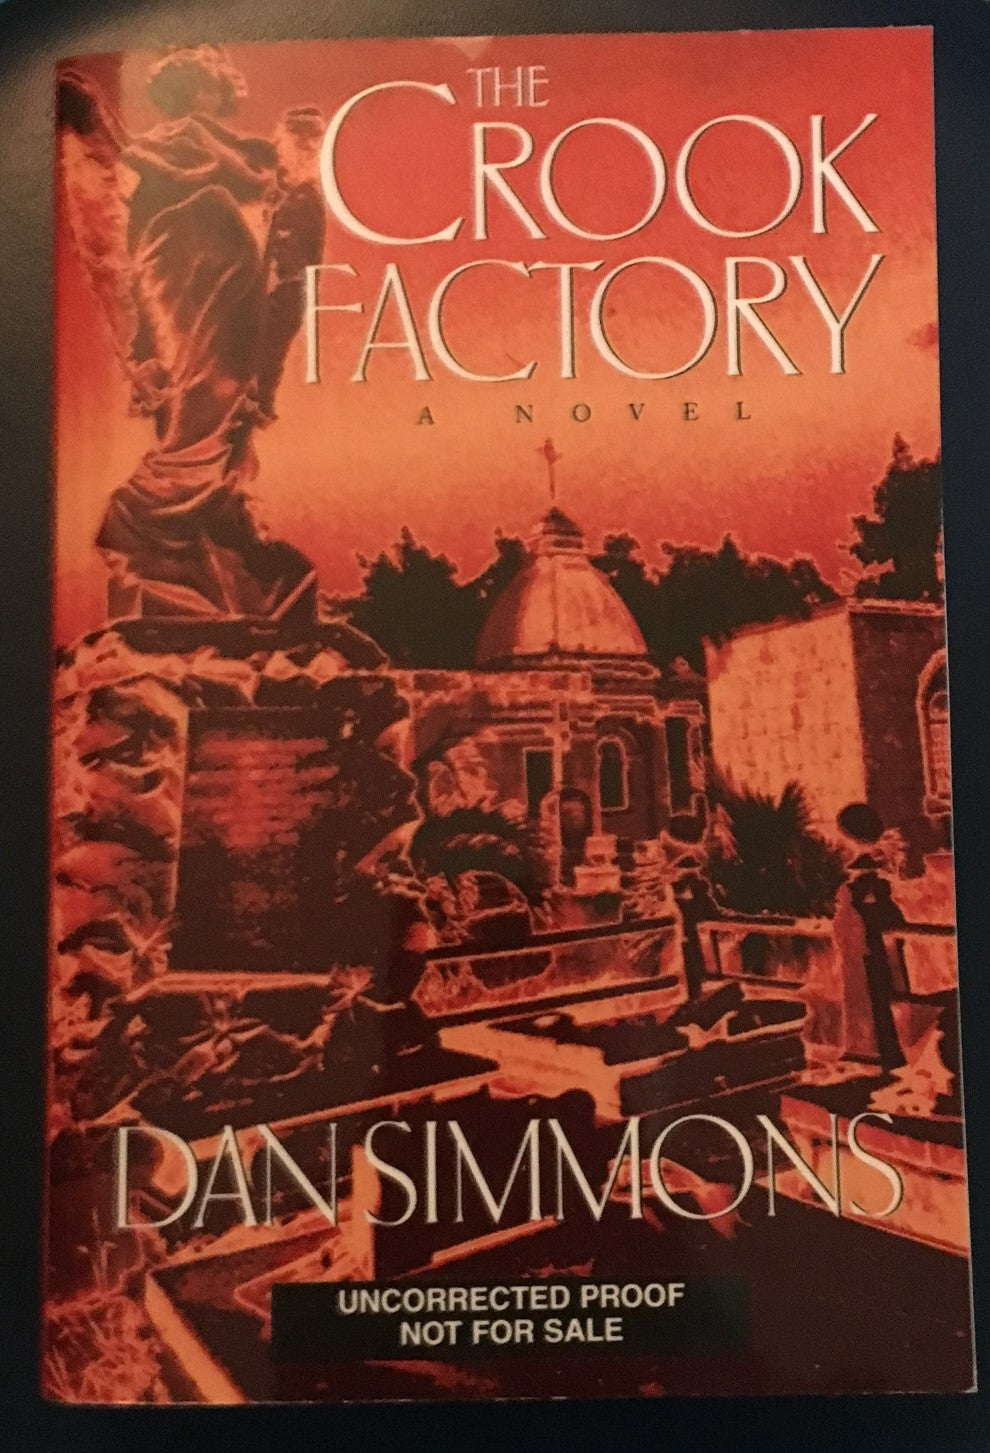 The Crook Factory by Dan Simmons (Rare ARC/Proof Copy)